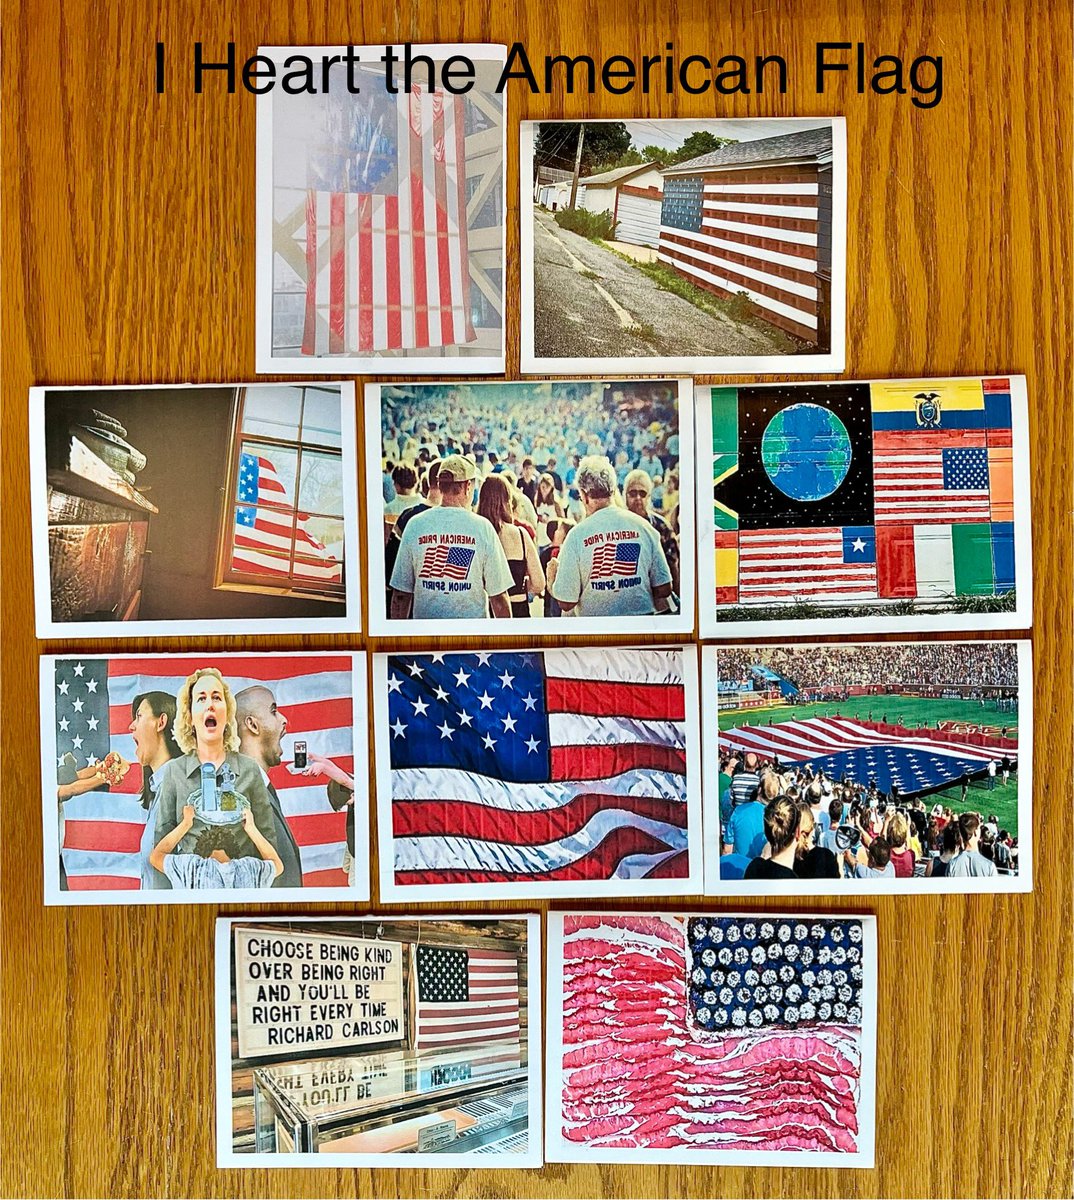 SUMMER SALE through 8/31! 10 - blank notecards with original photography. $15! DM or emkarts website #notecards #sendacard #supportlocalartists #photography #writeanote  #handmade #handmadecards #americanflag #flagphotos